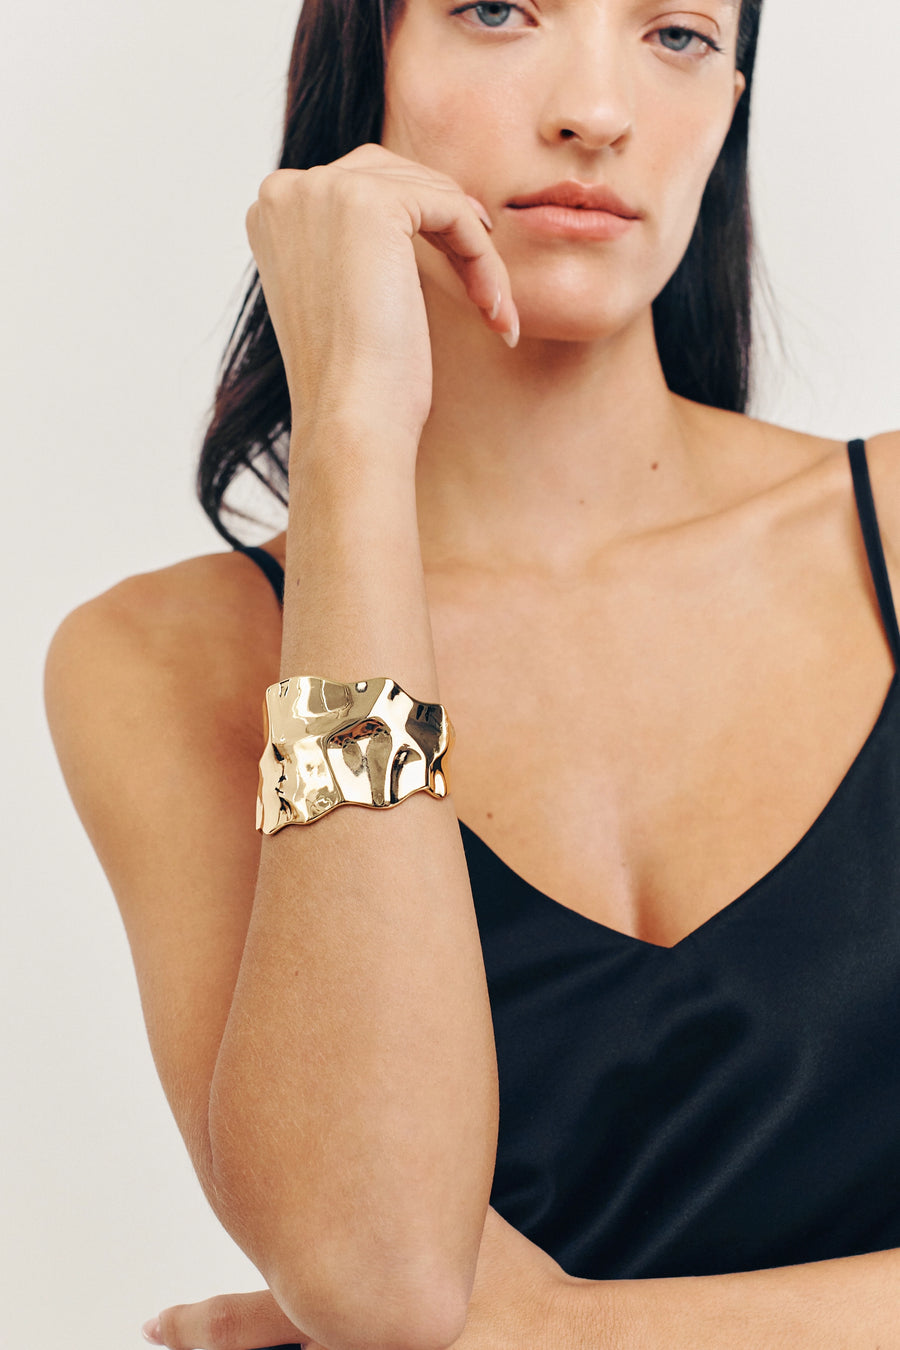 ORPHIC Cuff. Broad crumpled plate in high gloss finish cuff bracelet, 18K gold vermeil, handmade, hypoallergenic, water-resistant